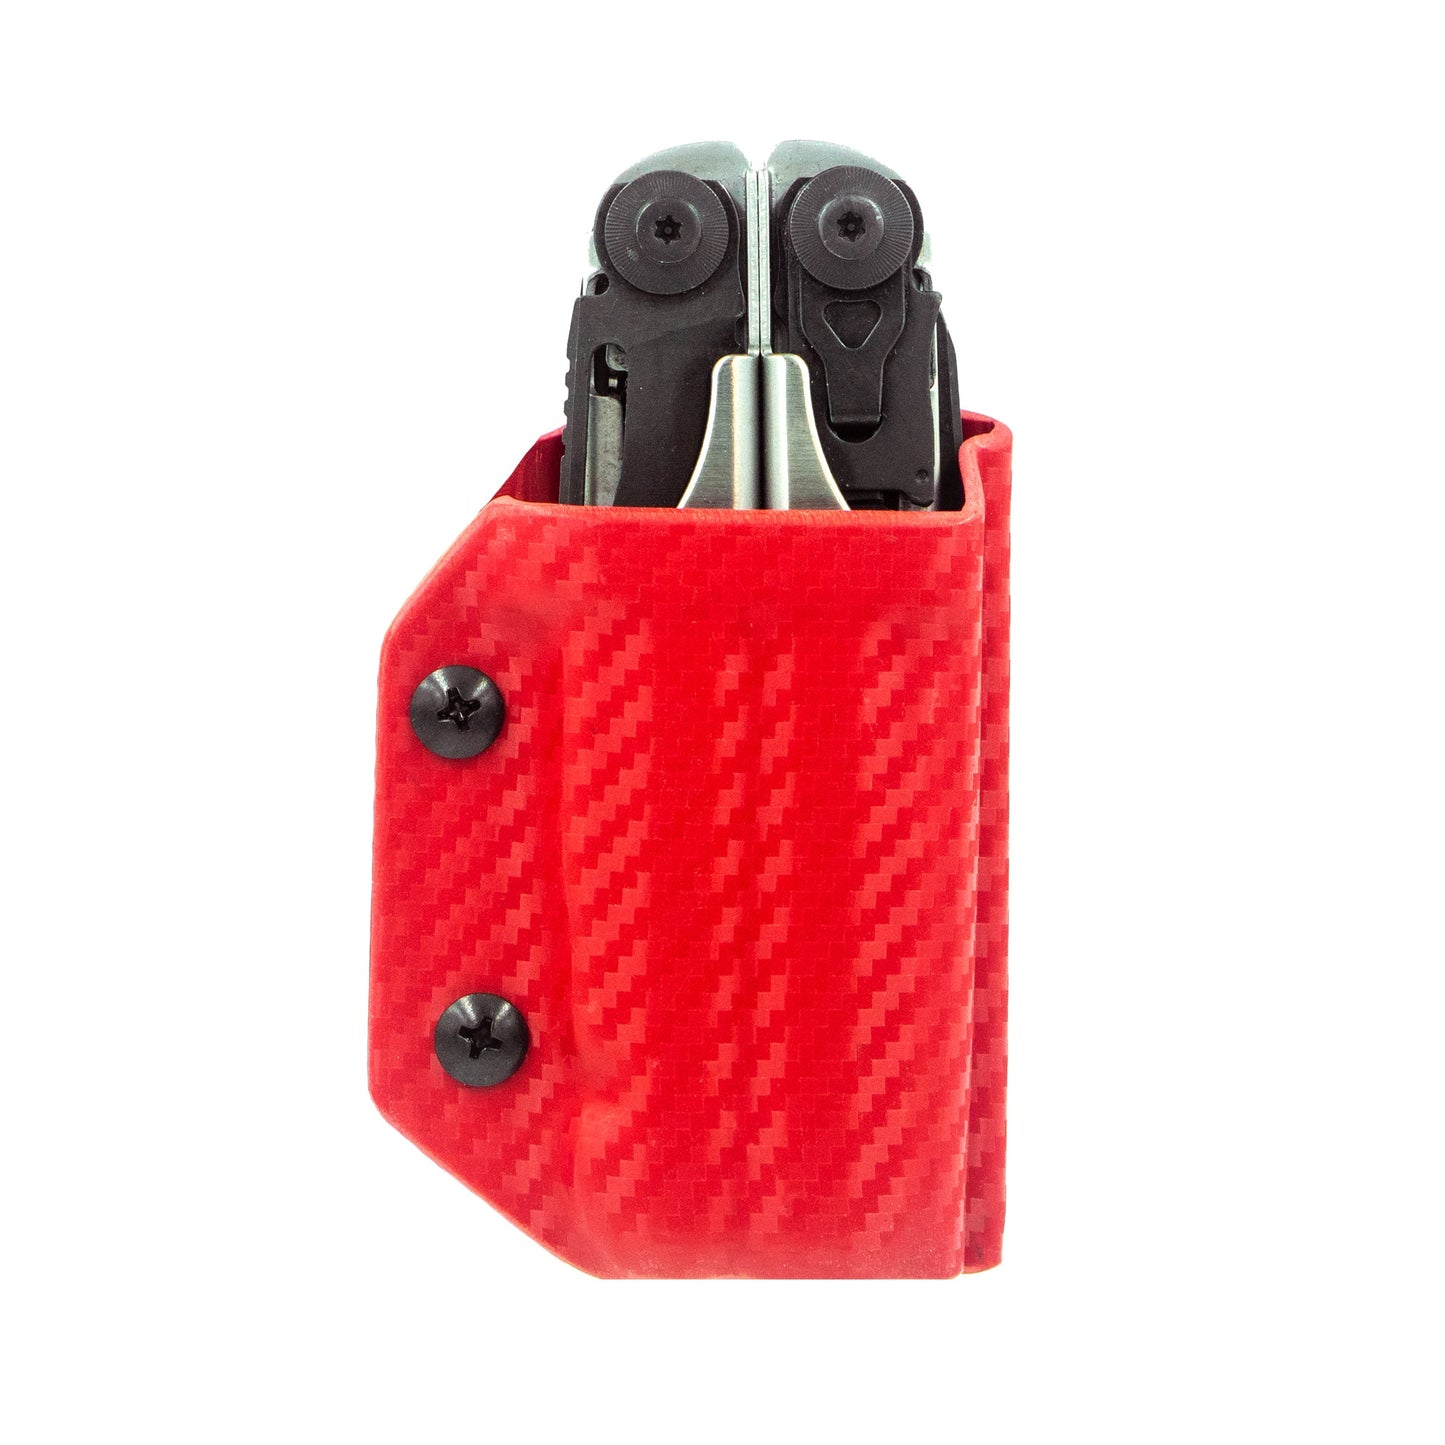 Kydex Sheath for the Leatherman Surge Clip & Carry